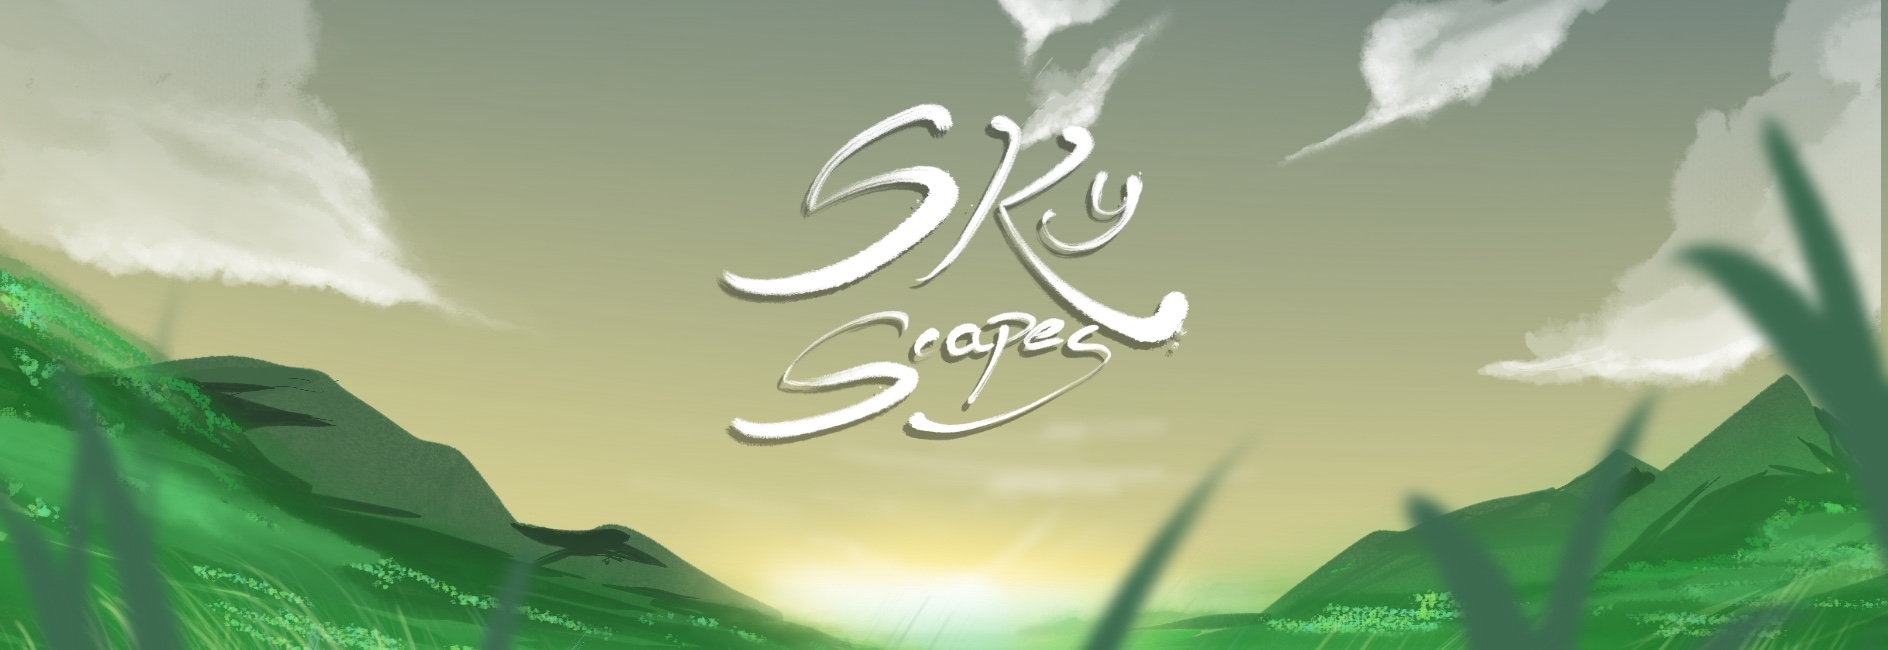 Sky Scapes banner